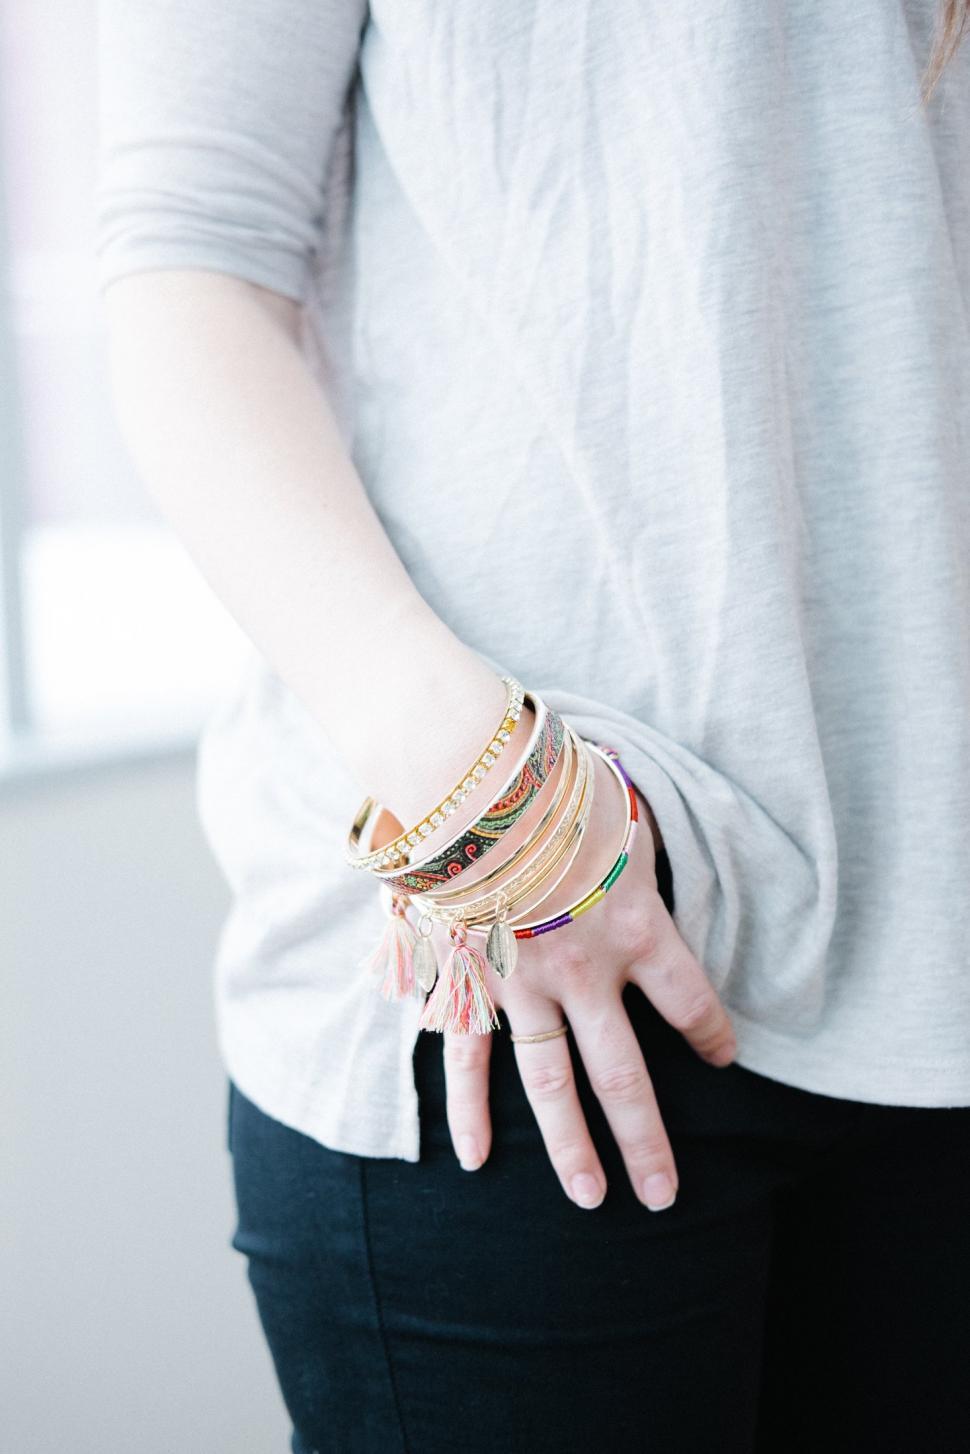 Free Image of A person wearing bracelets 